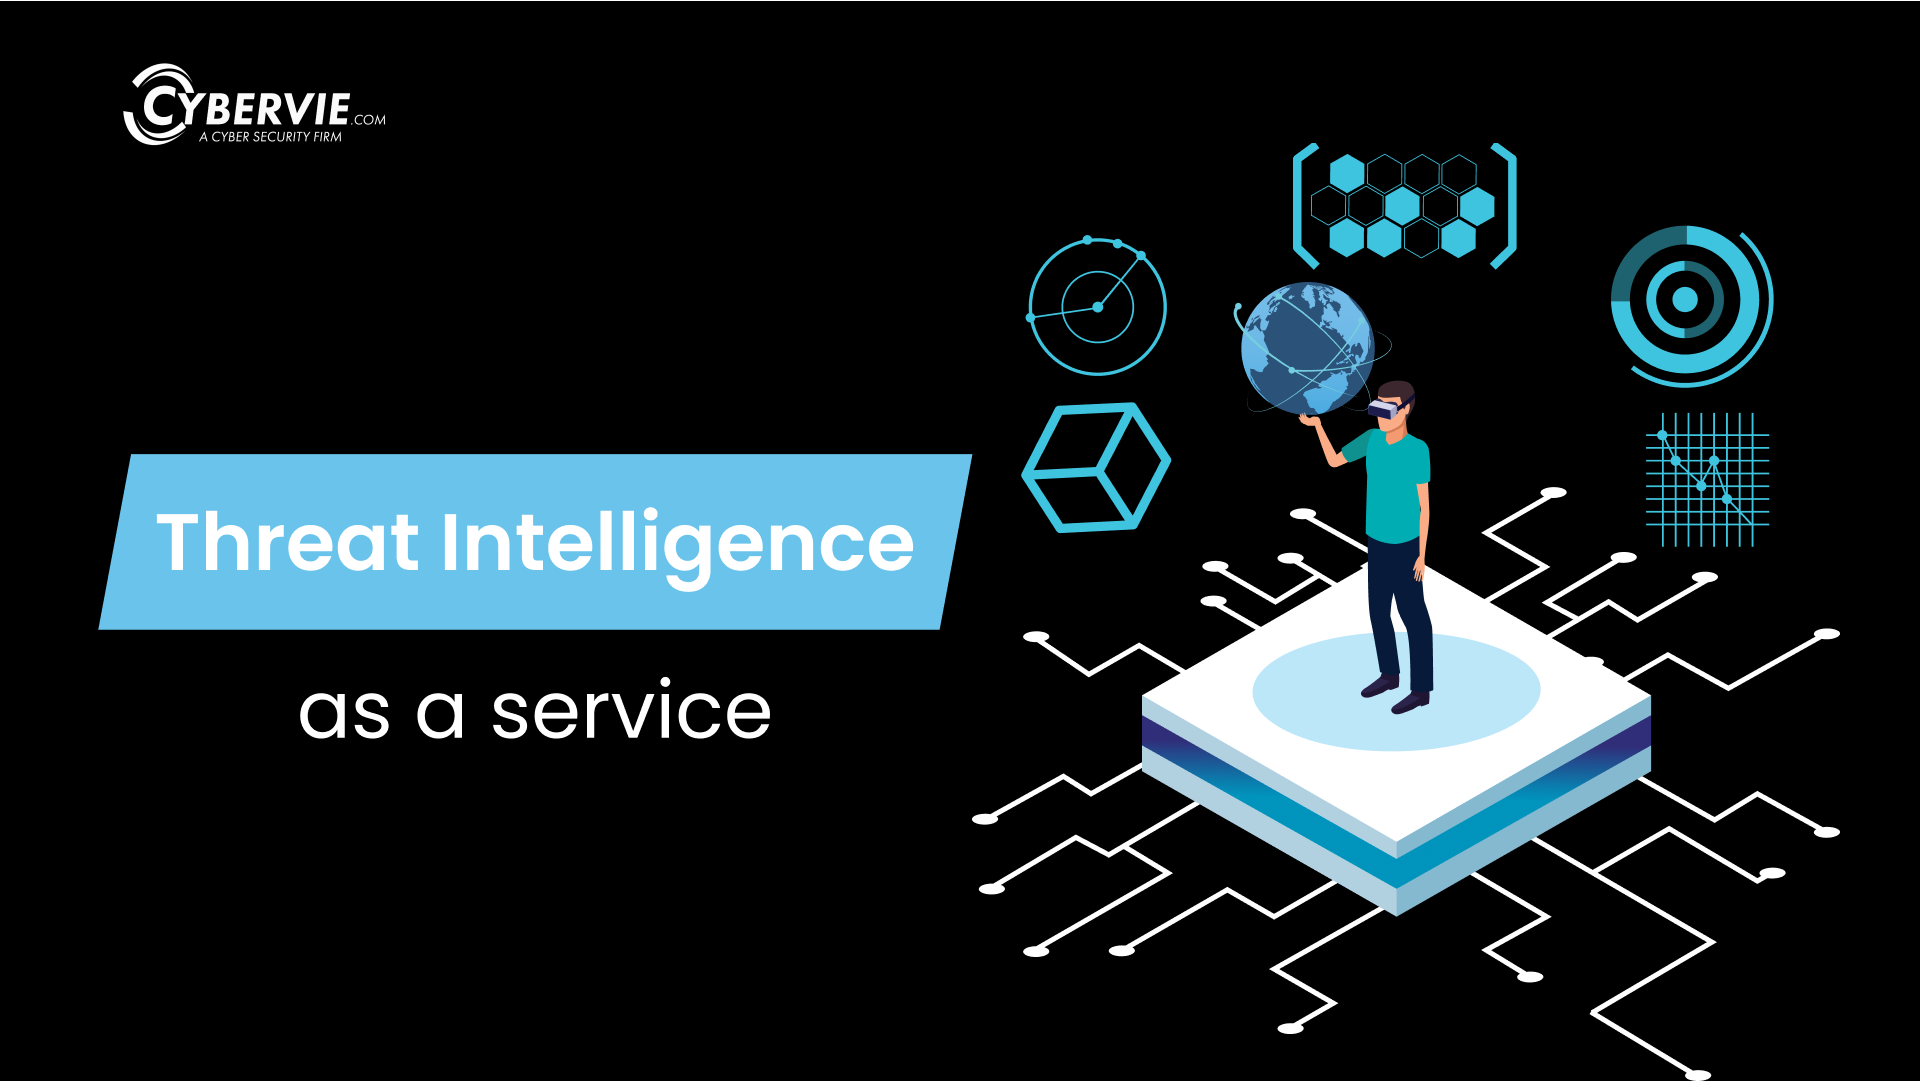 Threat Intelligence as a service